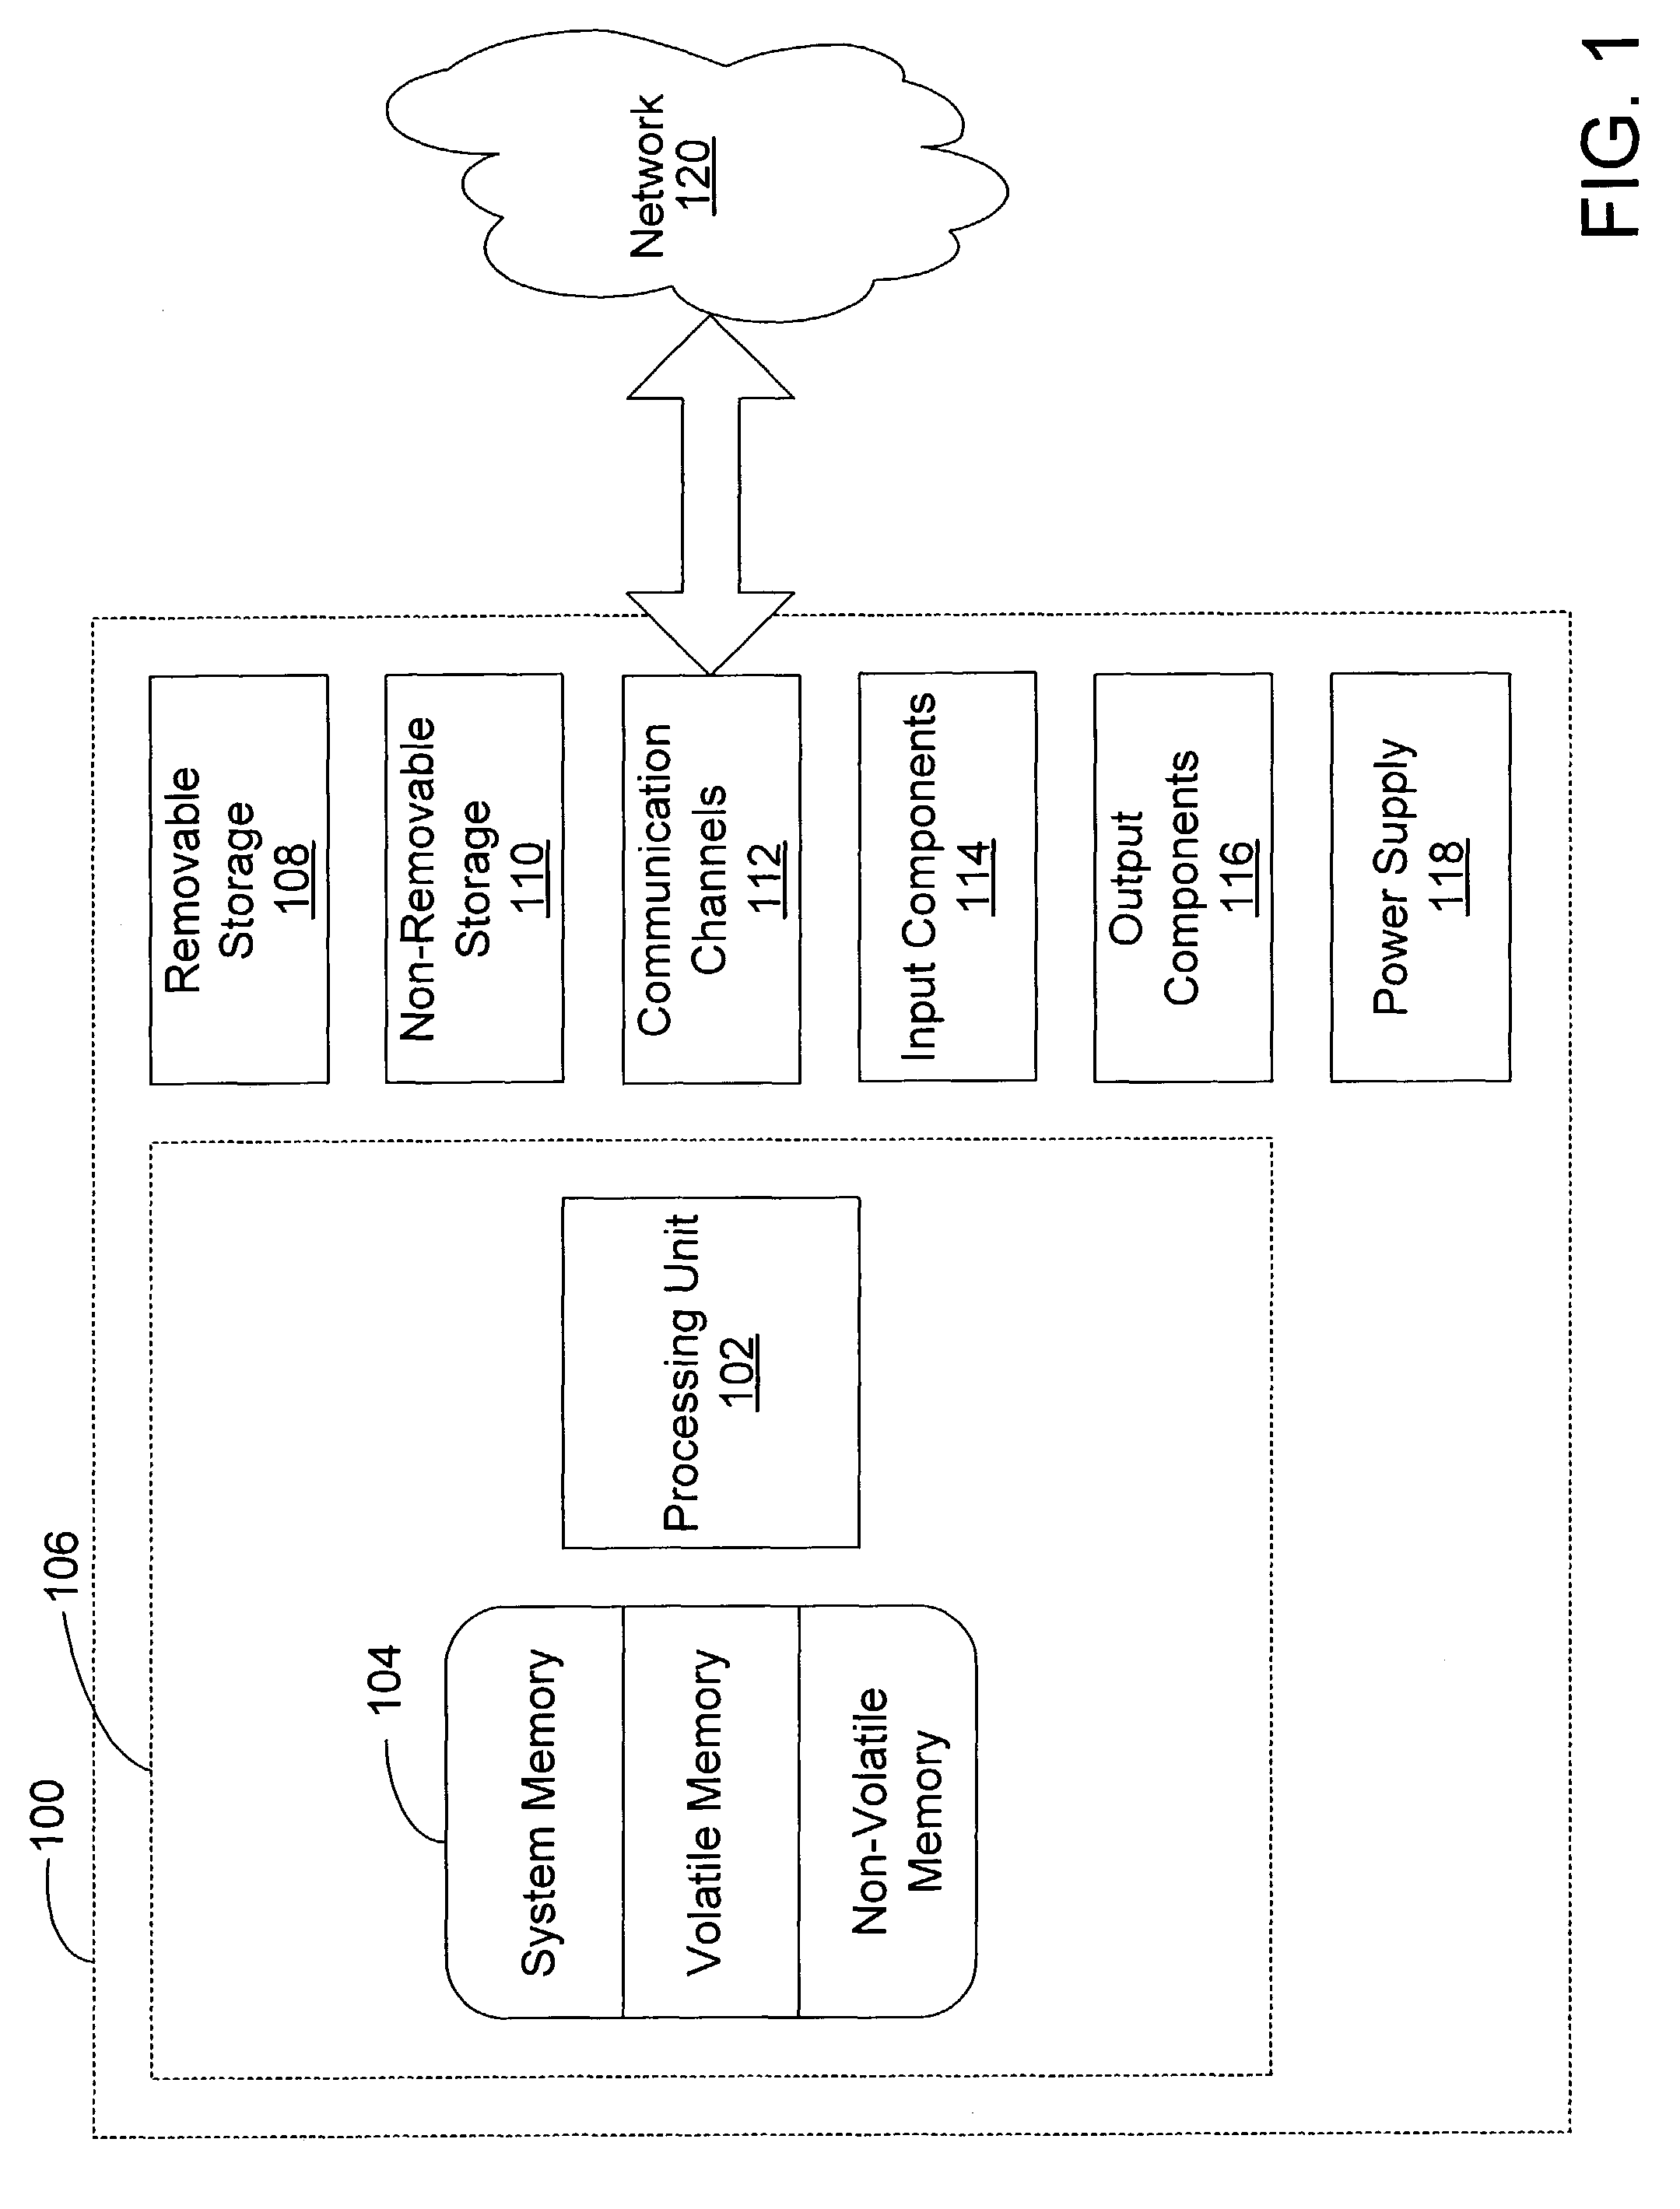 Methods and systems for planning and tracking software reliability and availability